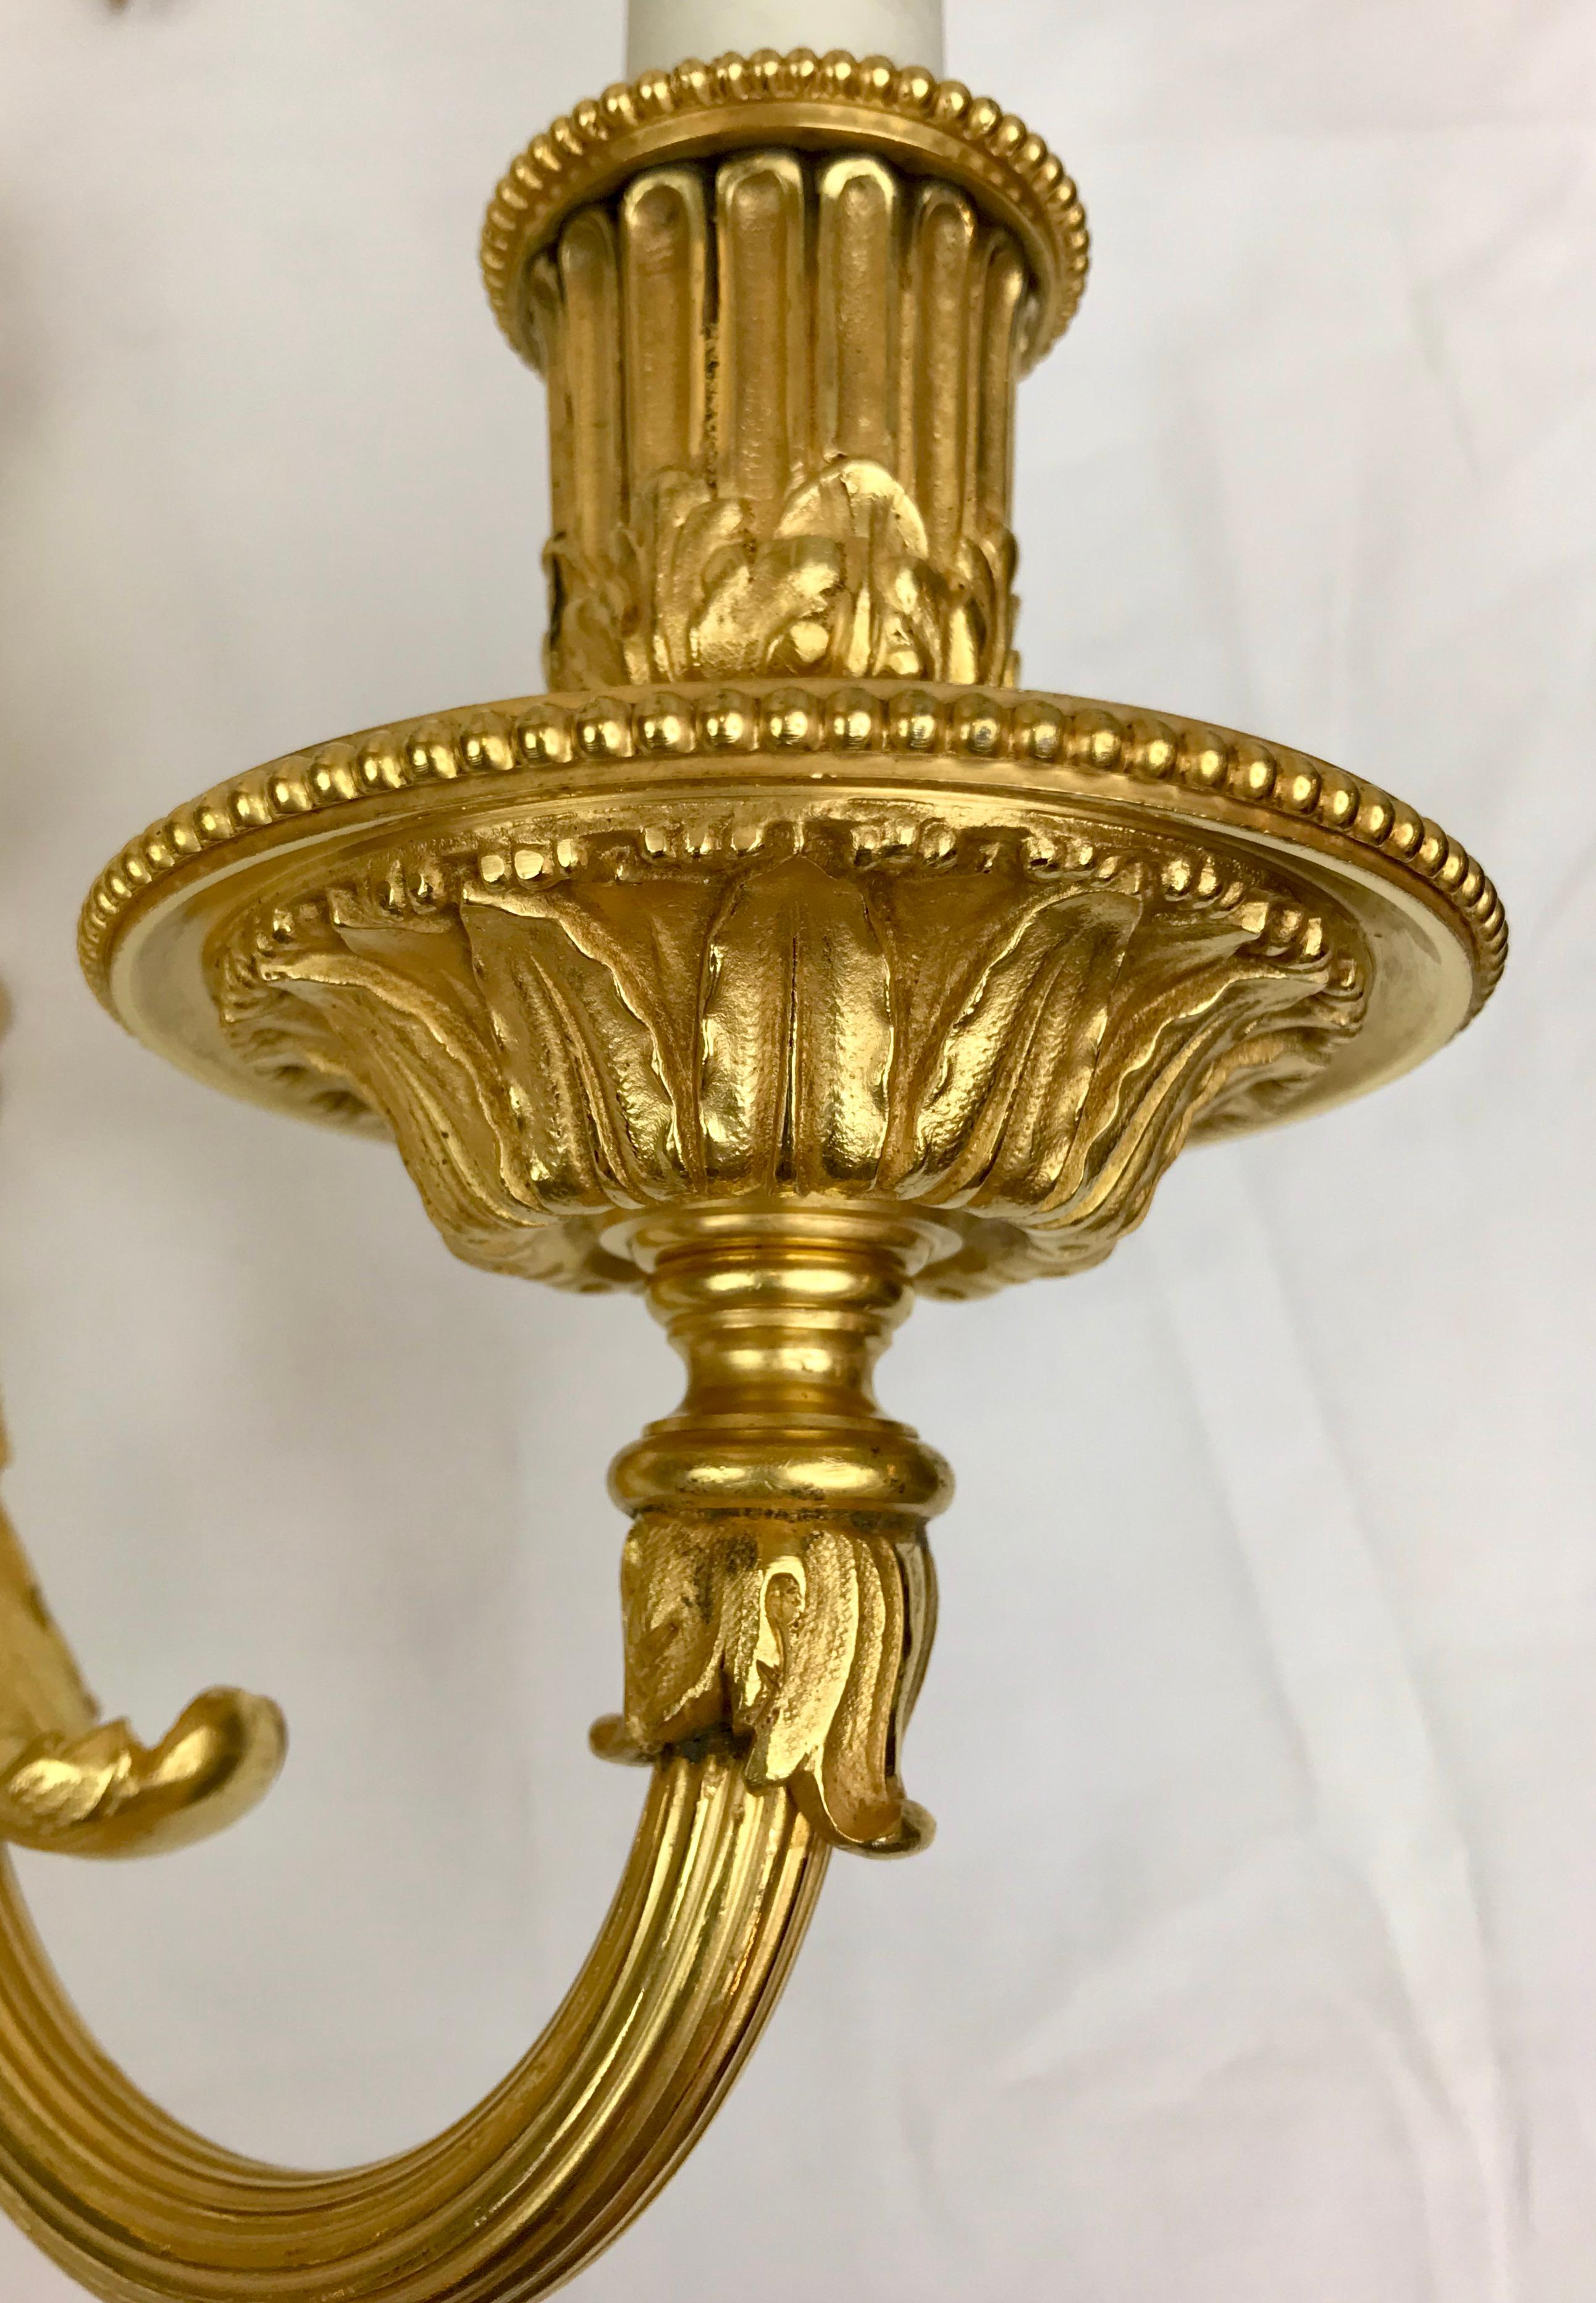 This fantastic quality pair of signed Louis XVI style gilt bronze sconces are by the renown marker Edward F. Caldwell. They feature Neo-Classical motifs including acanthus leaves, bowknots, and pinecone finials. 